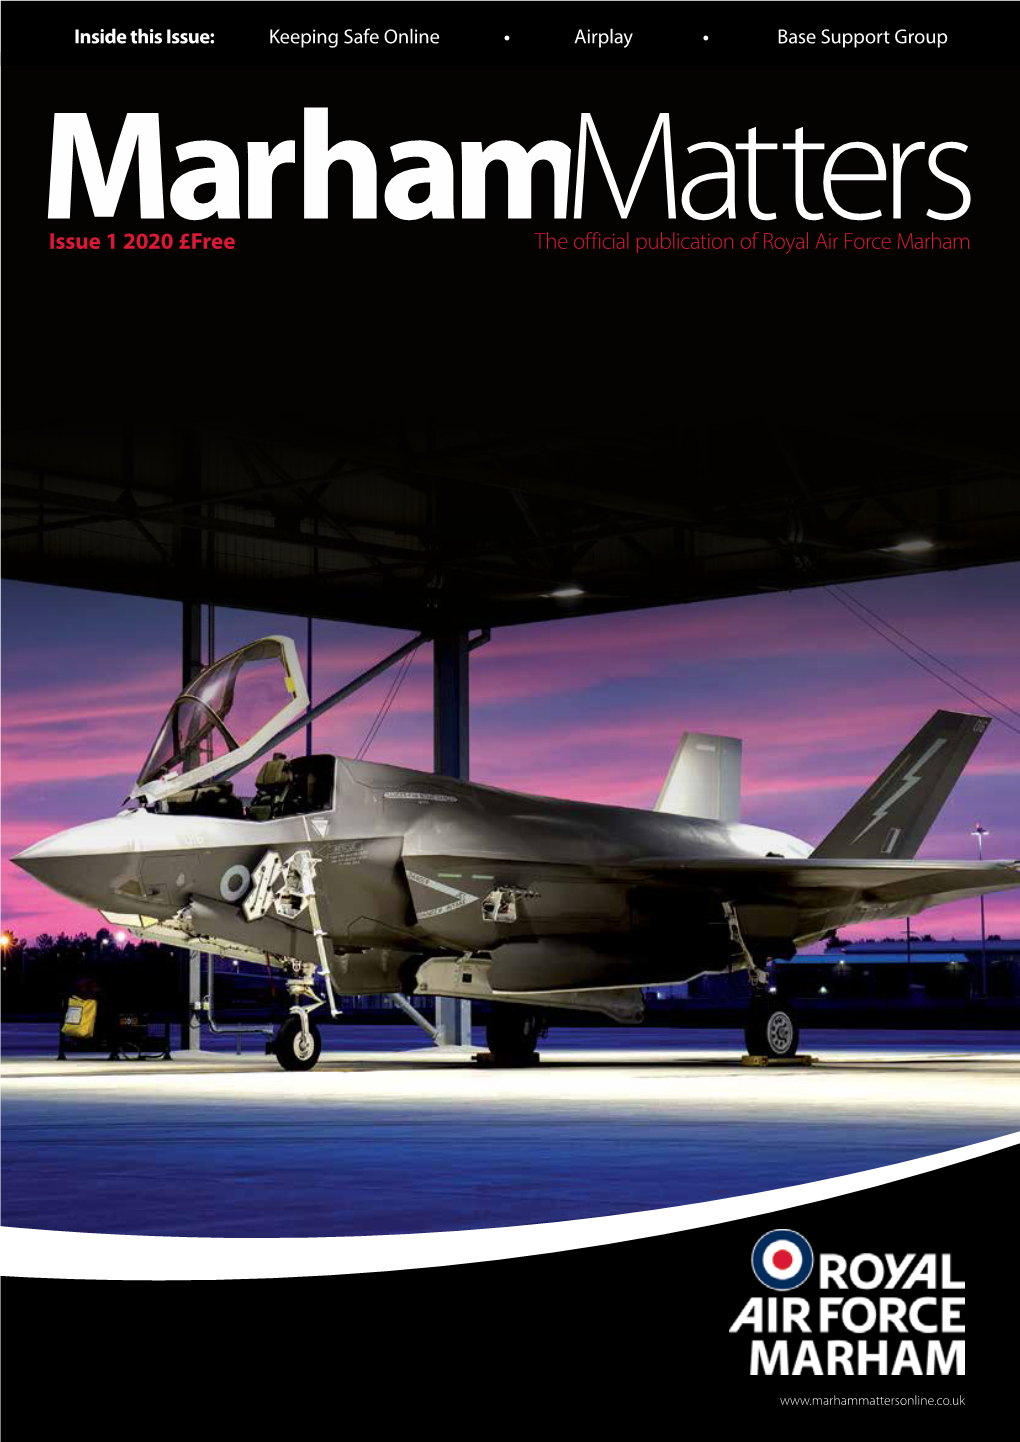 The Official Publication of Royal Air Force Marham Issue 1 2020 £Free